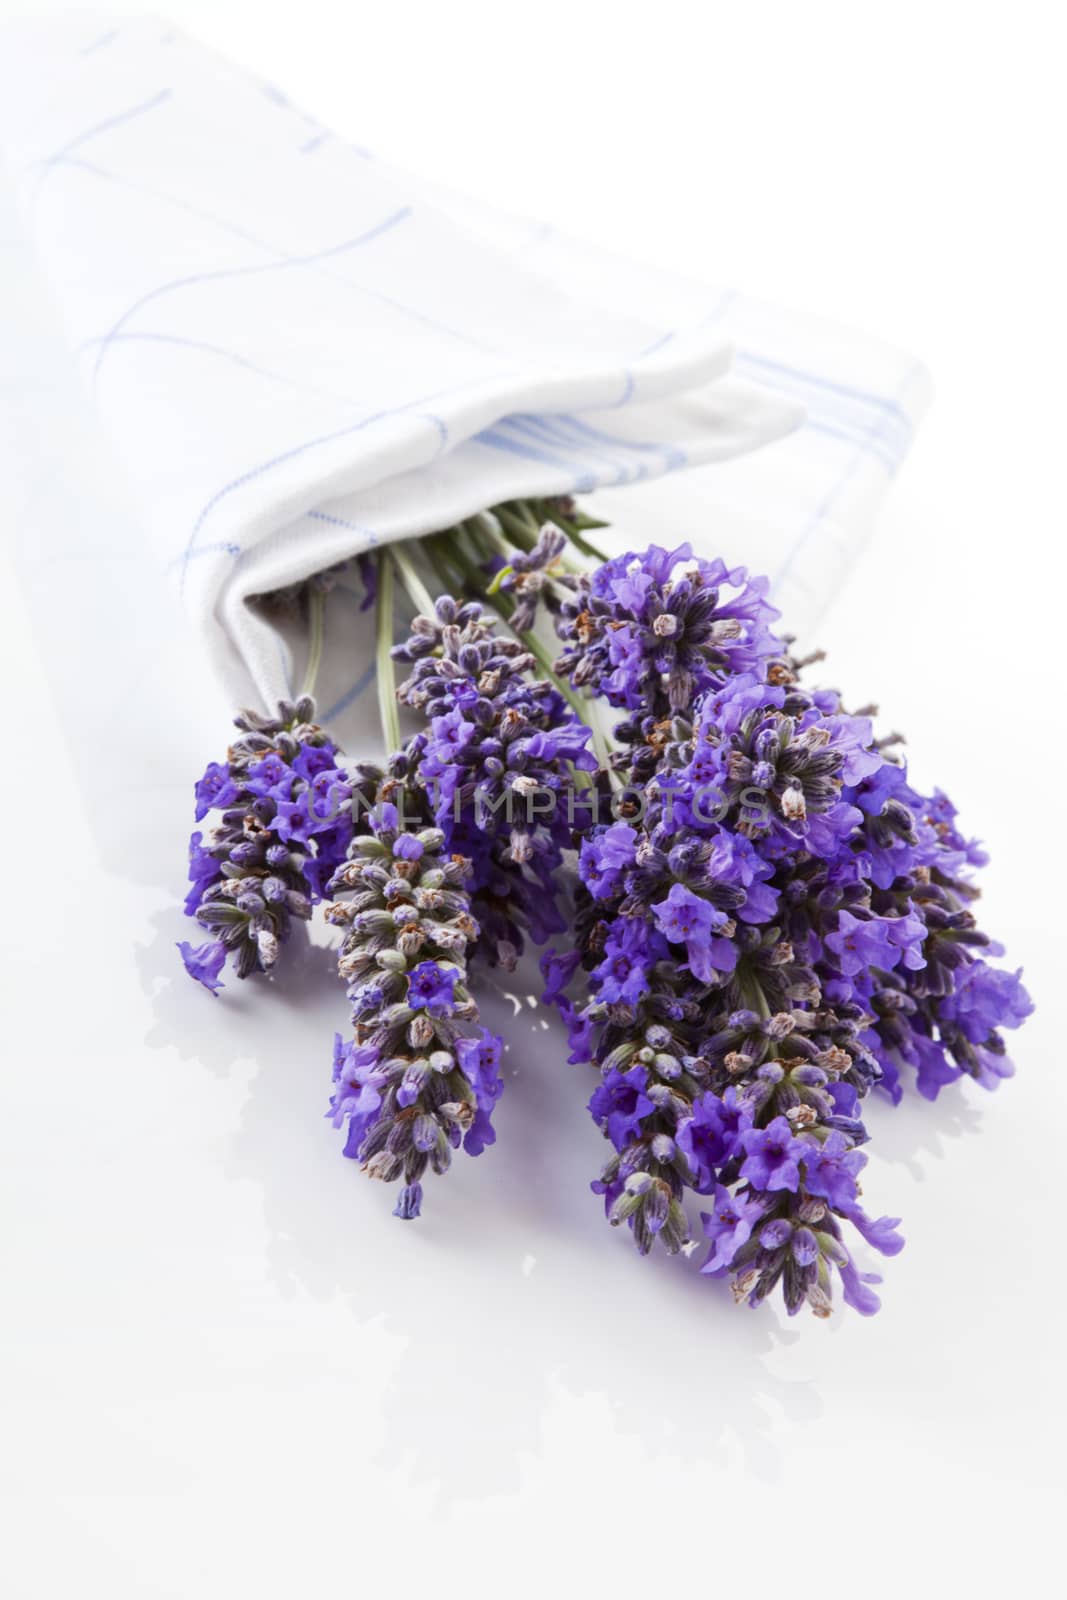 Luxurious lavender bouquet on white background. Aromatic herbs.